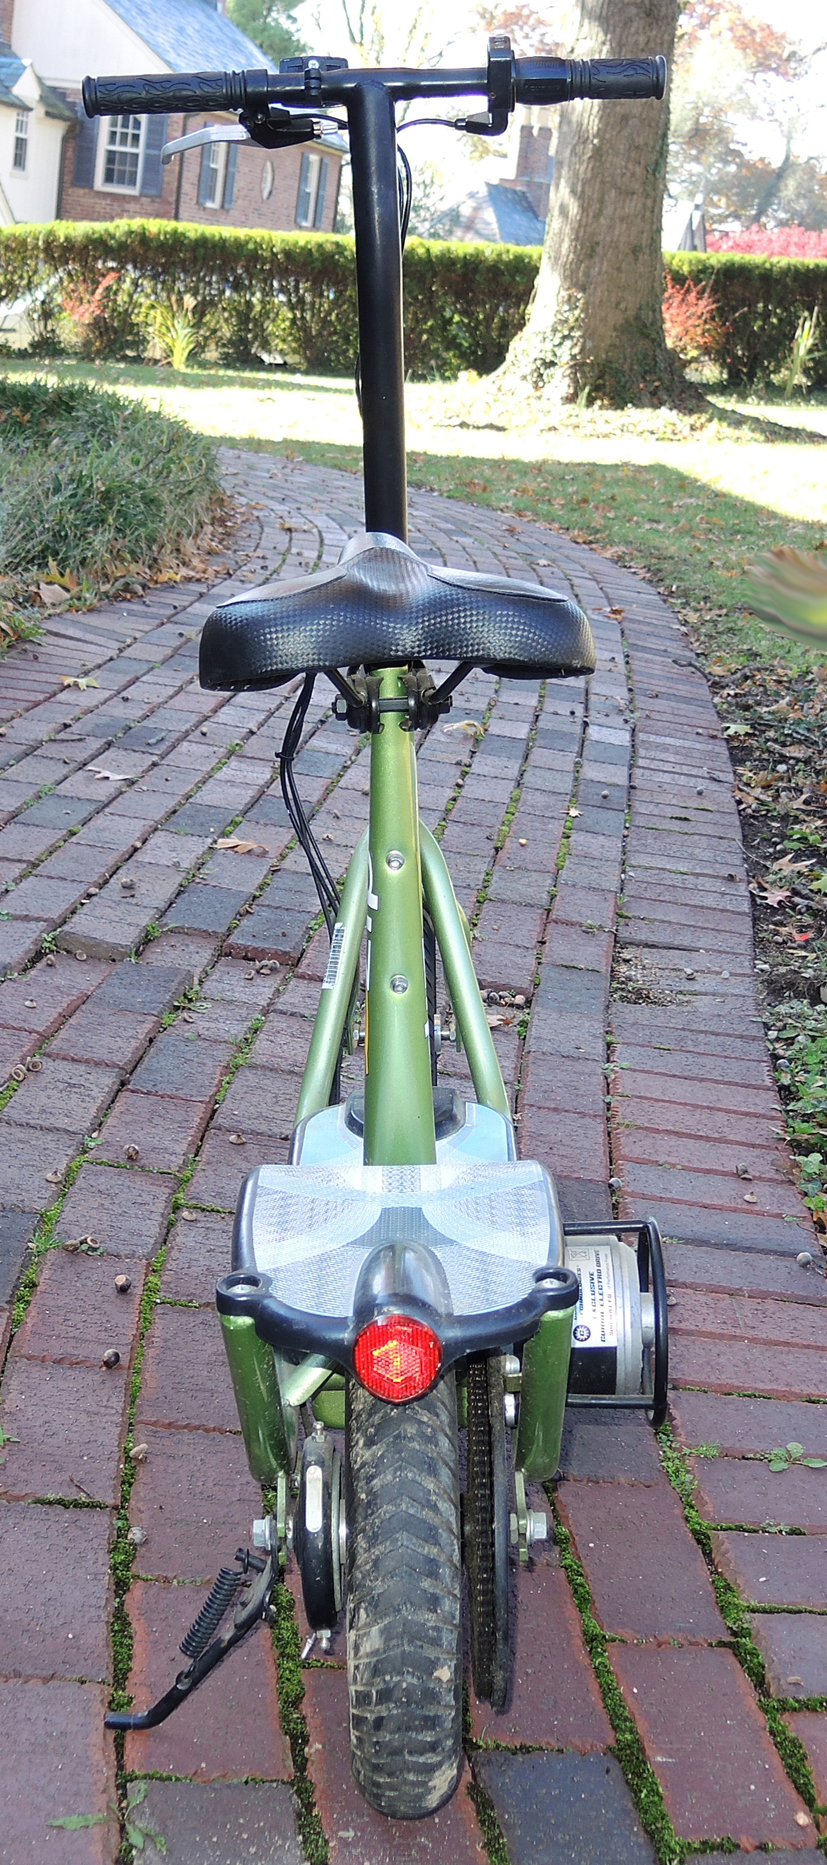 ezip 450 electric scooter